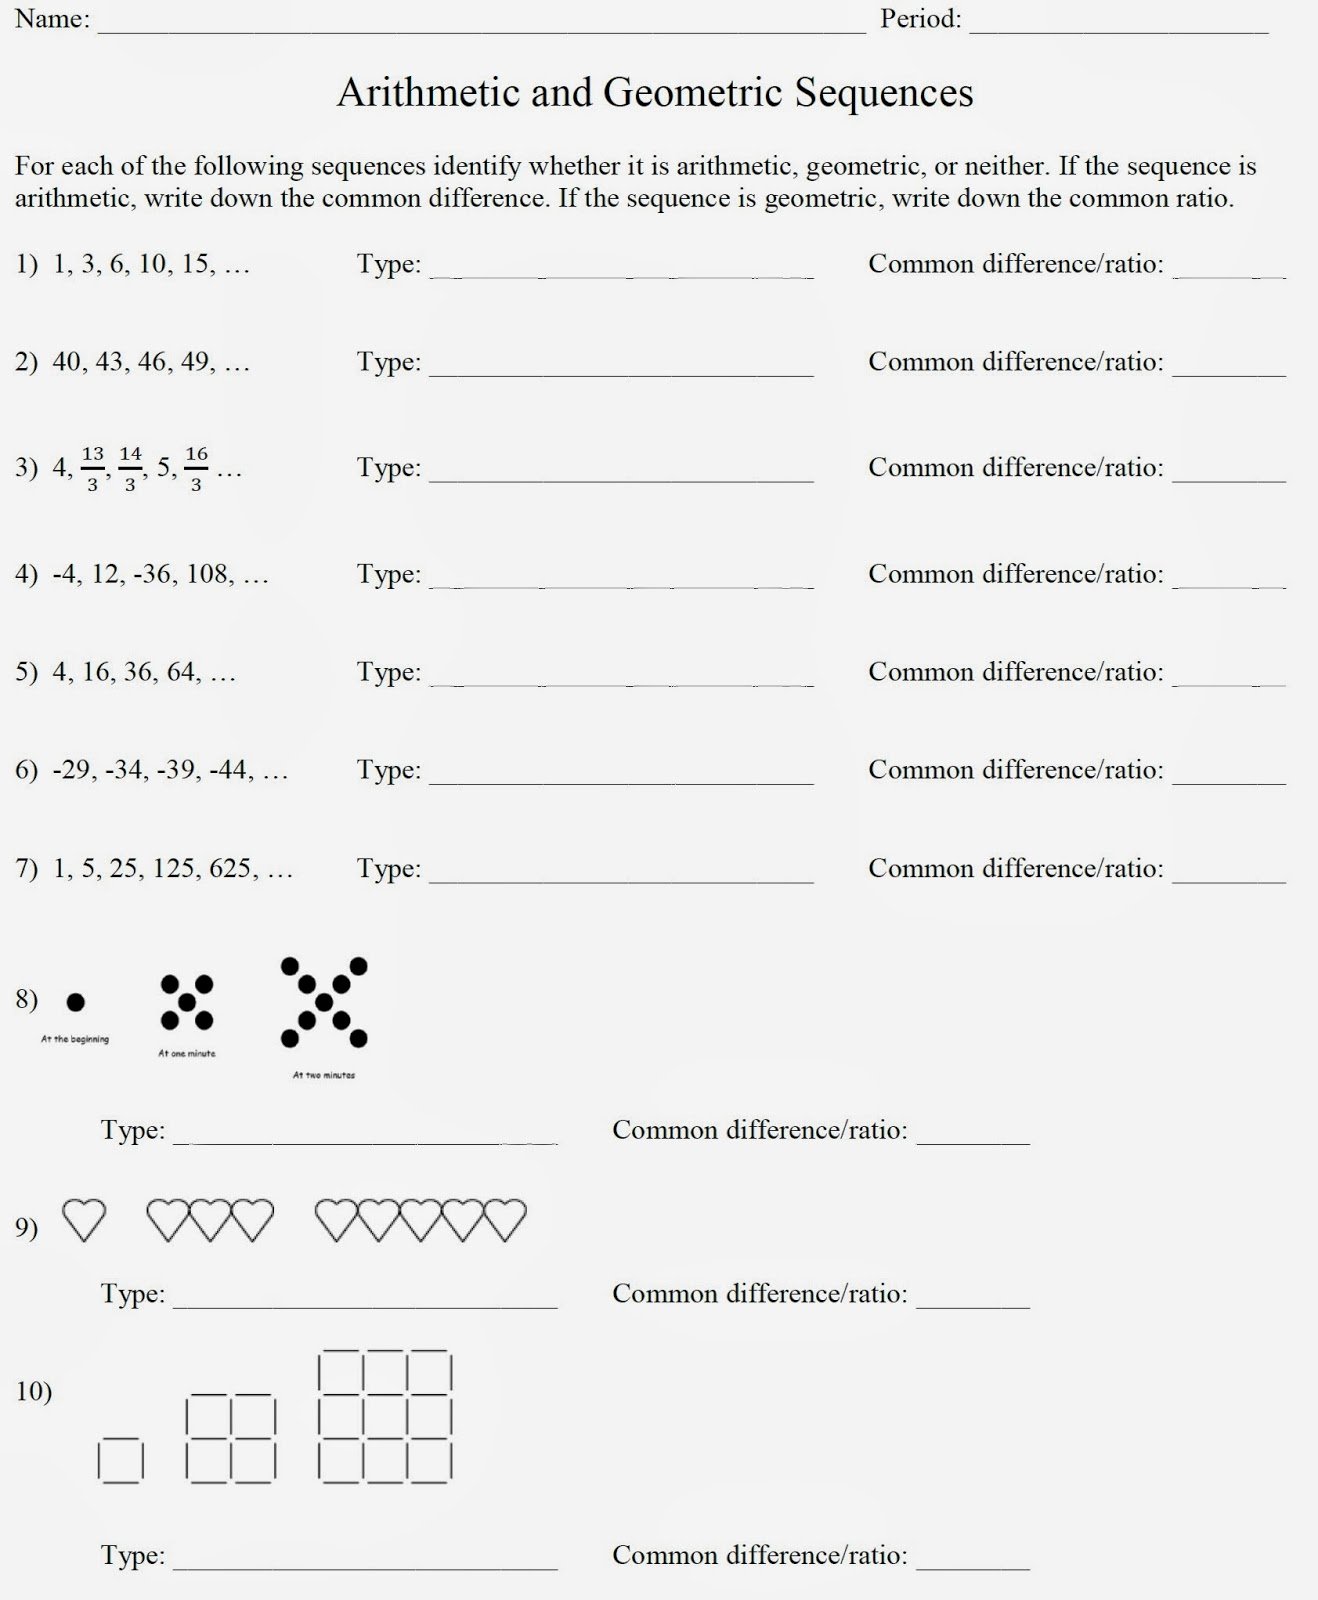 Geometric and Arithmetic Sequences Worksheet Fresh Mr Matt S Math Classes assignment Arithmetic and